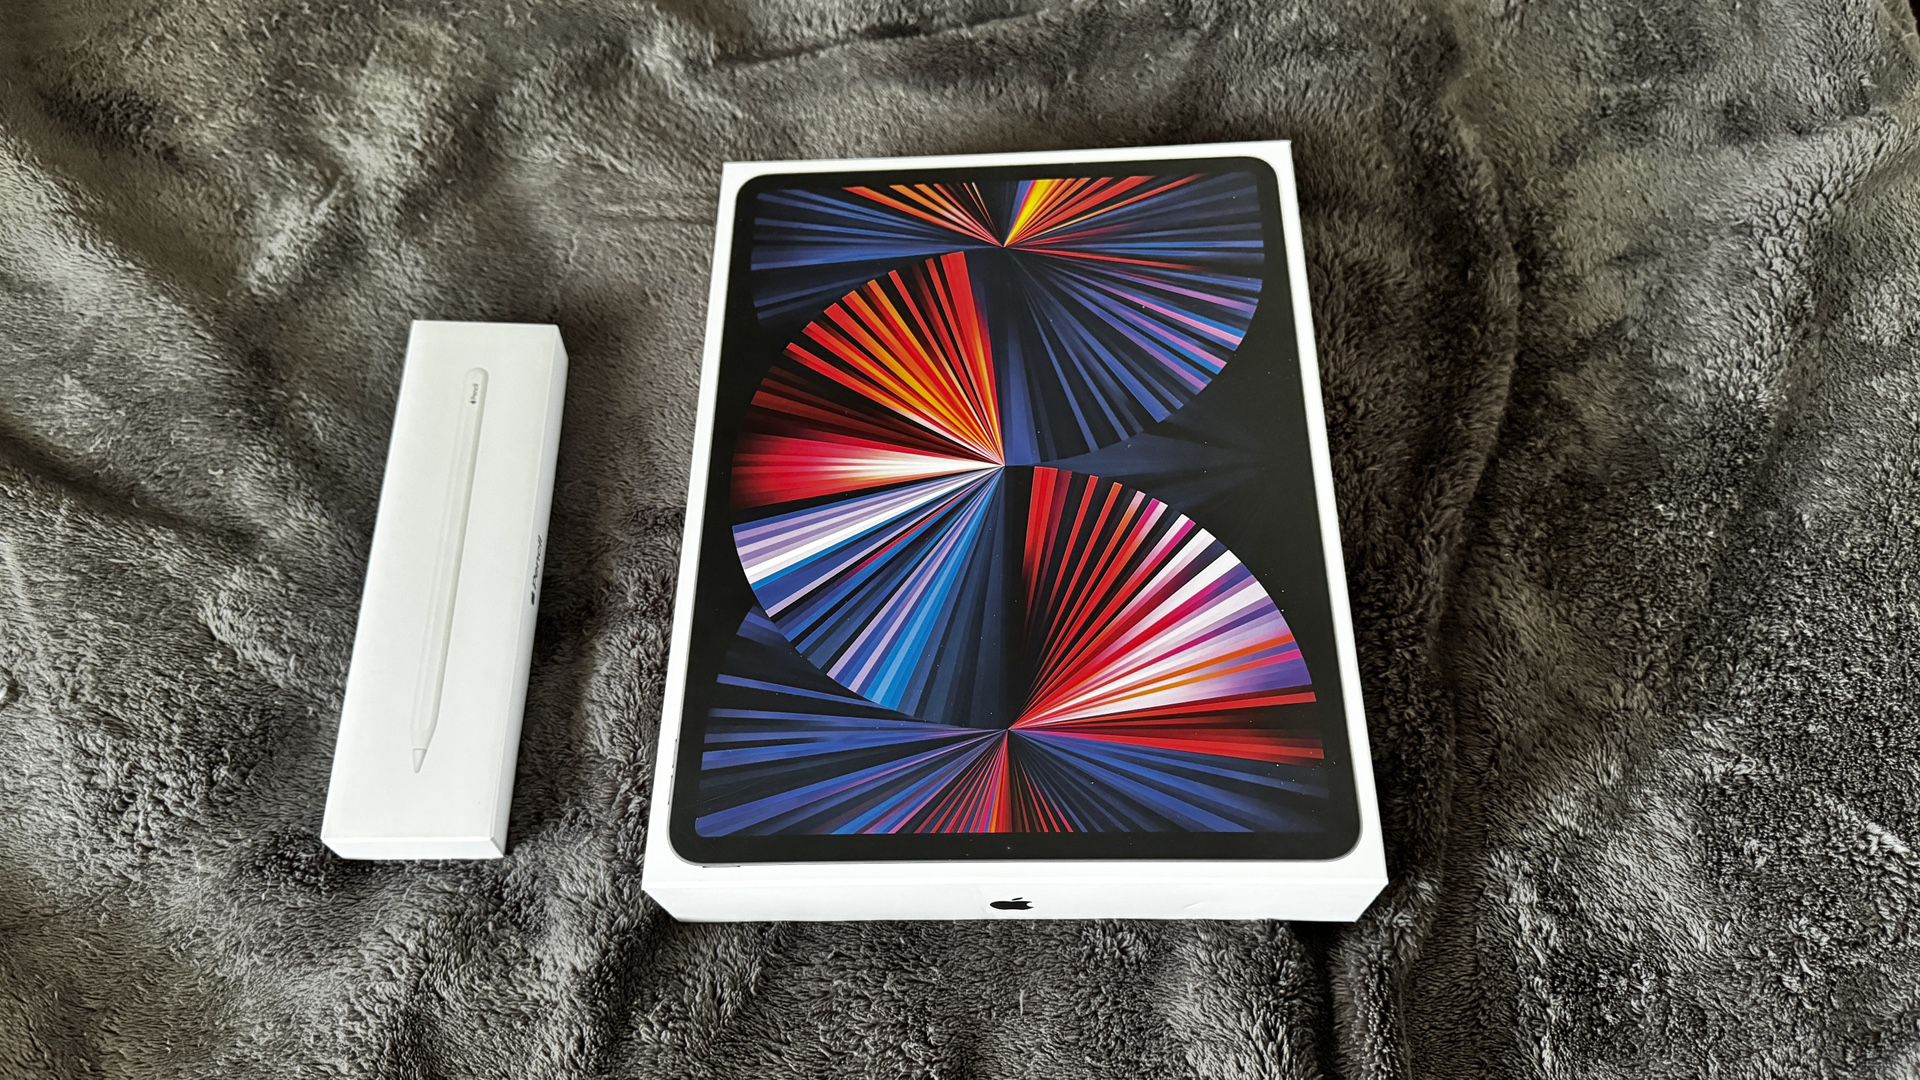 iPad Pro 12.9” With 2nd Gen Apple Pencil